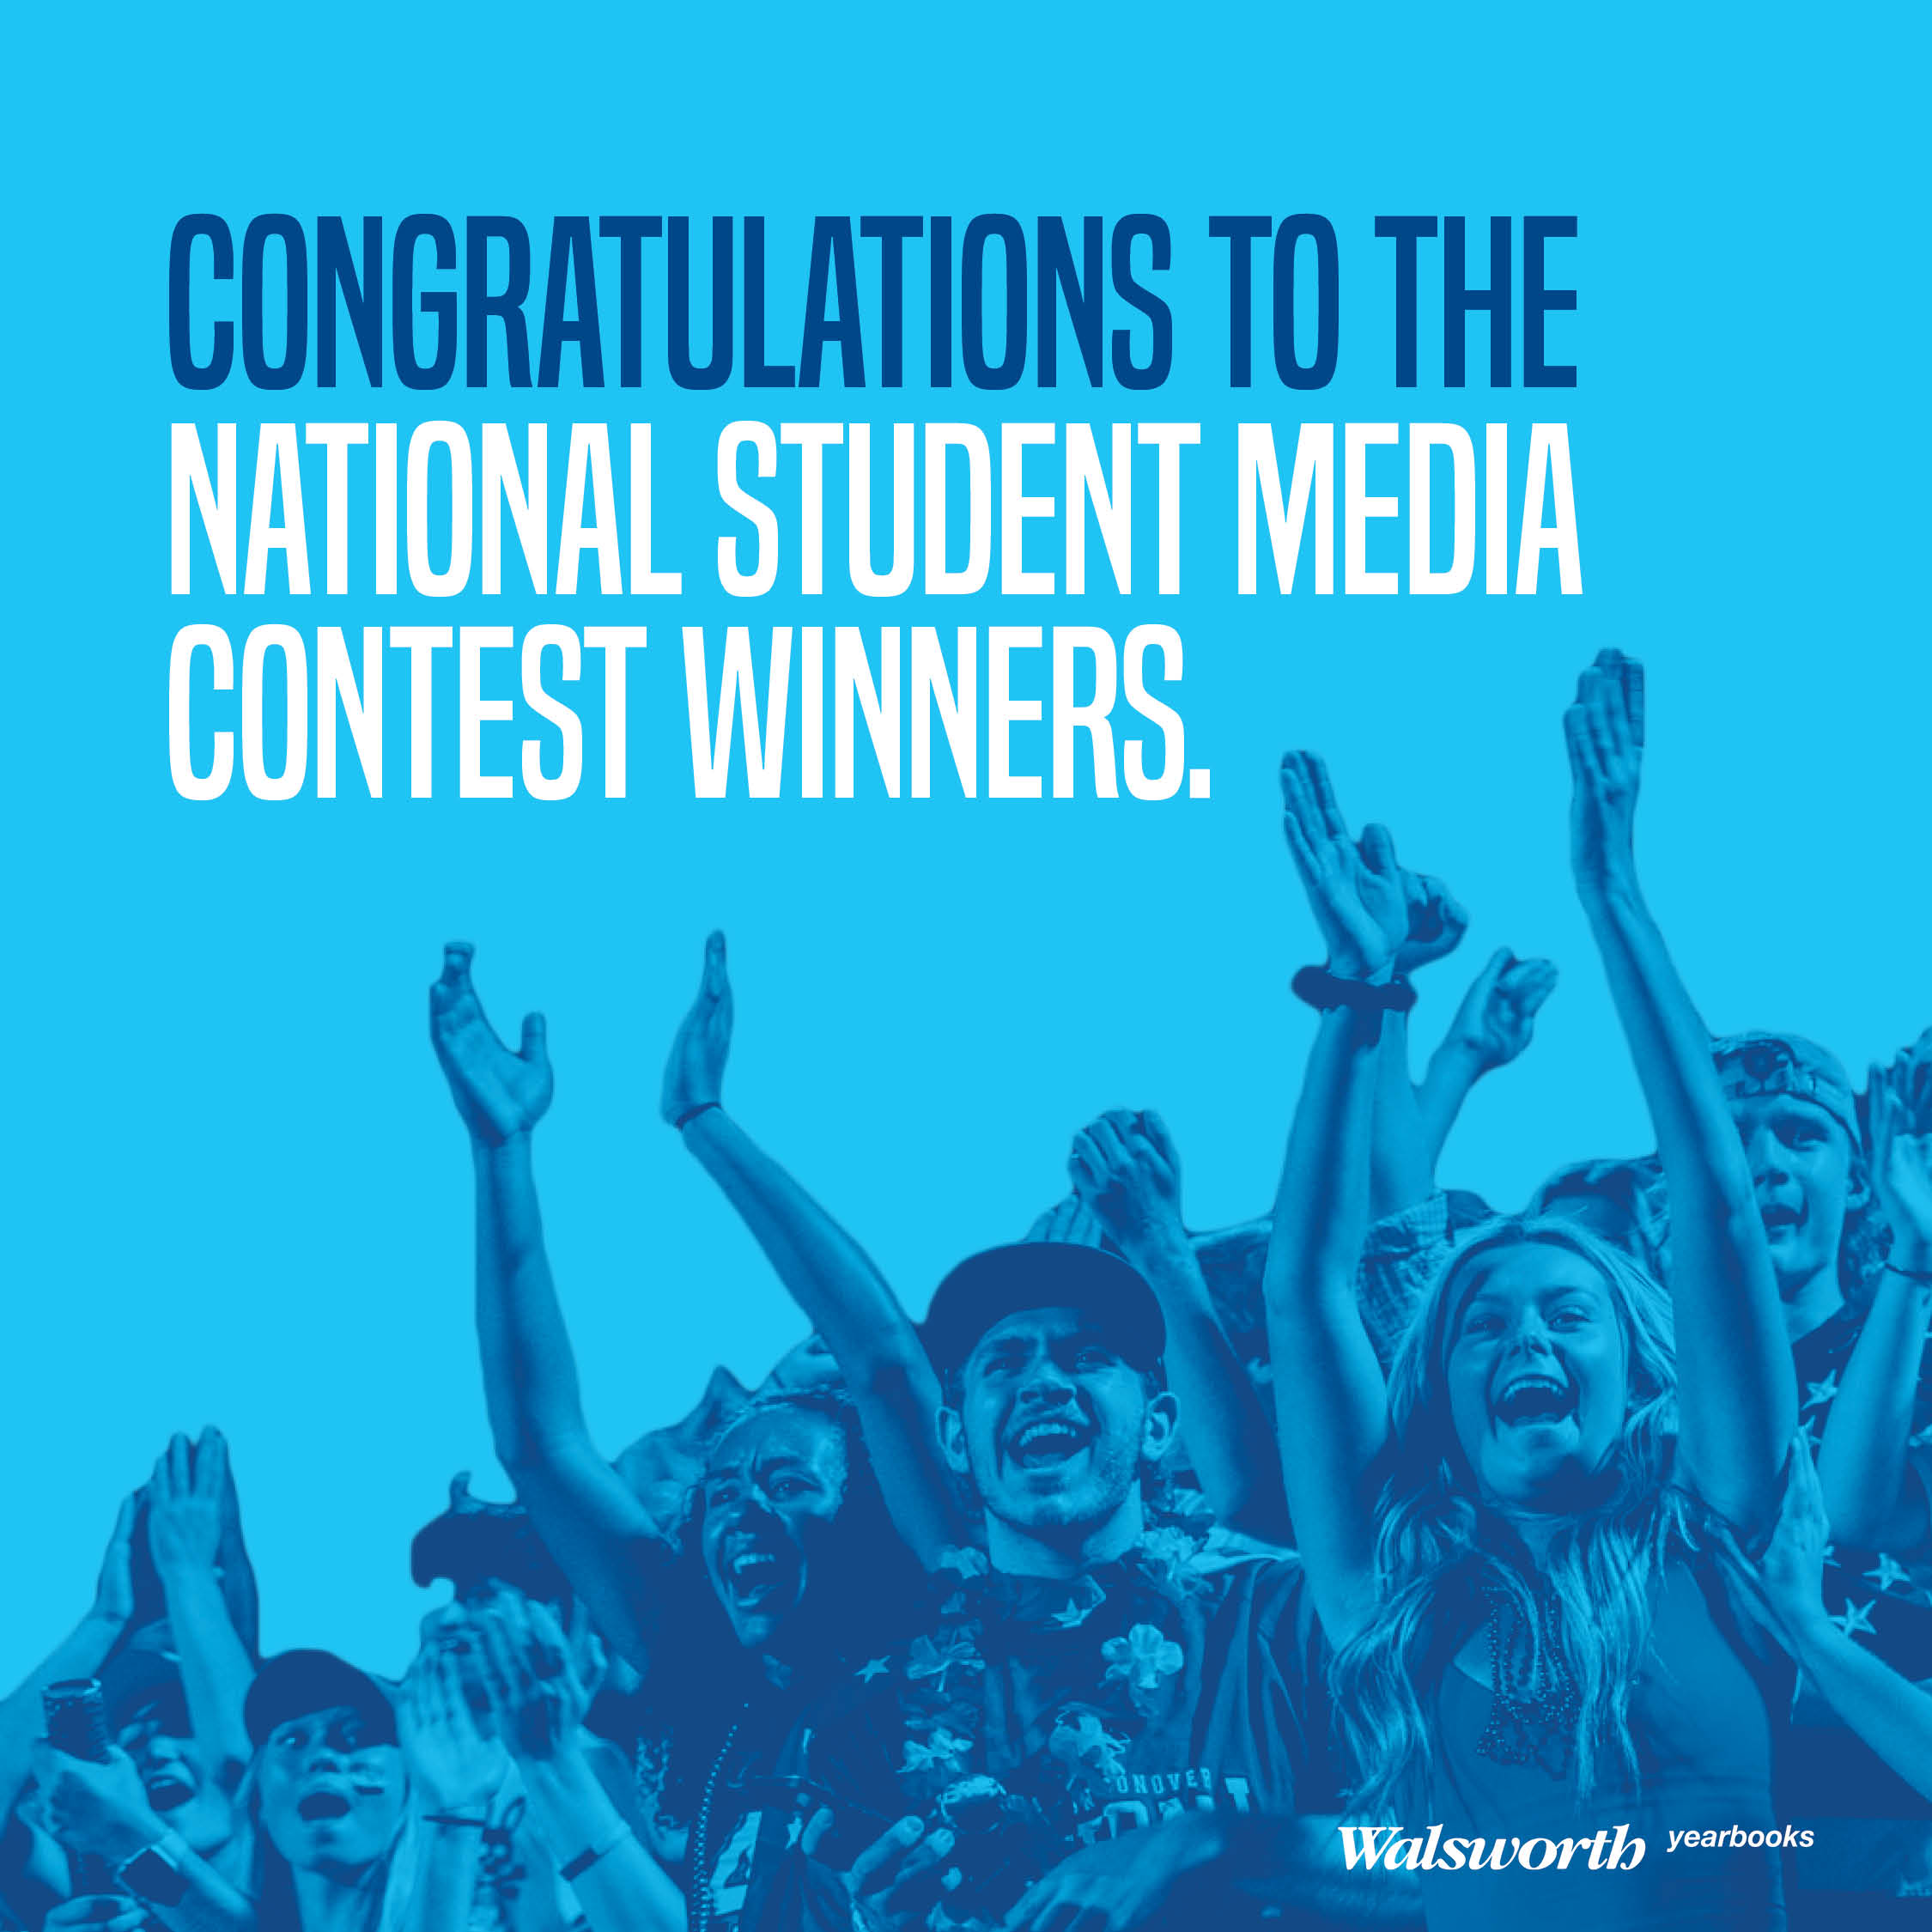 Let's congratulate our National Student Media Contest winners. Here we see a group of students happy to win